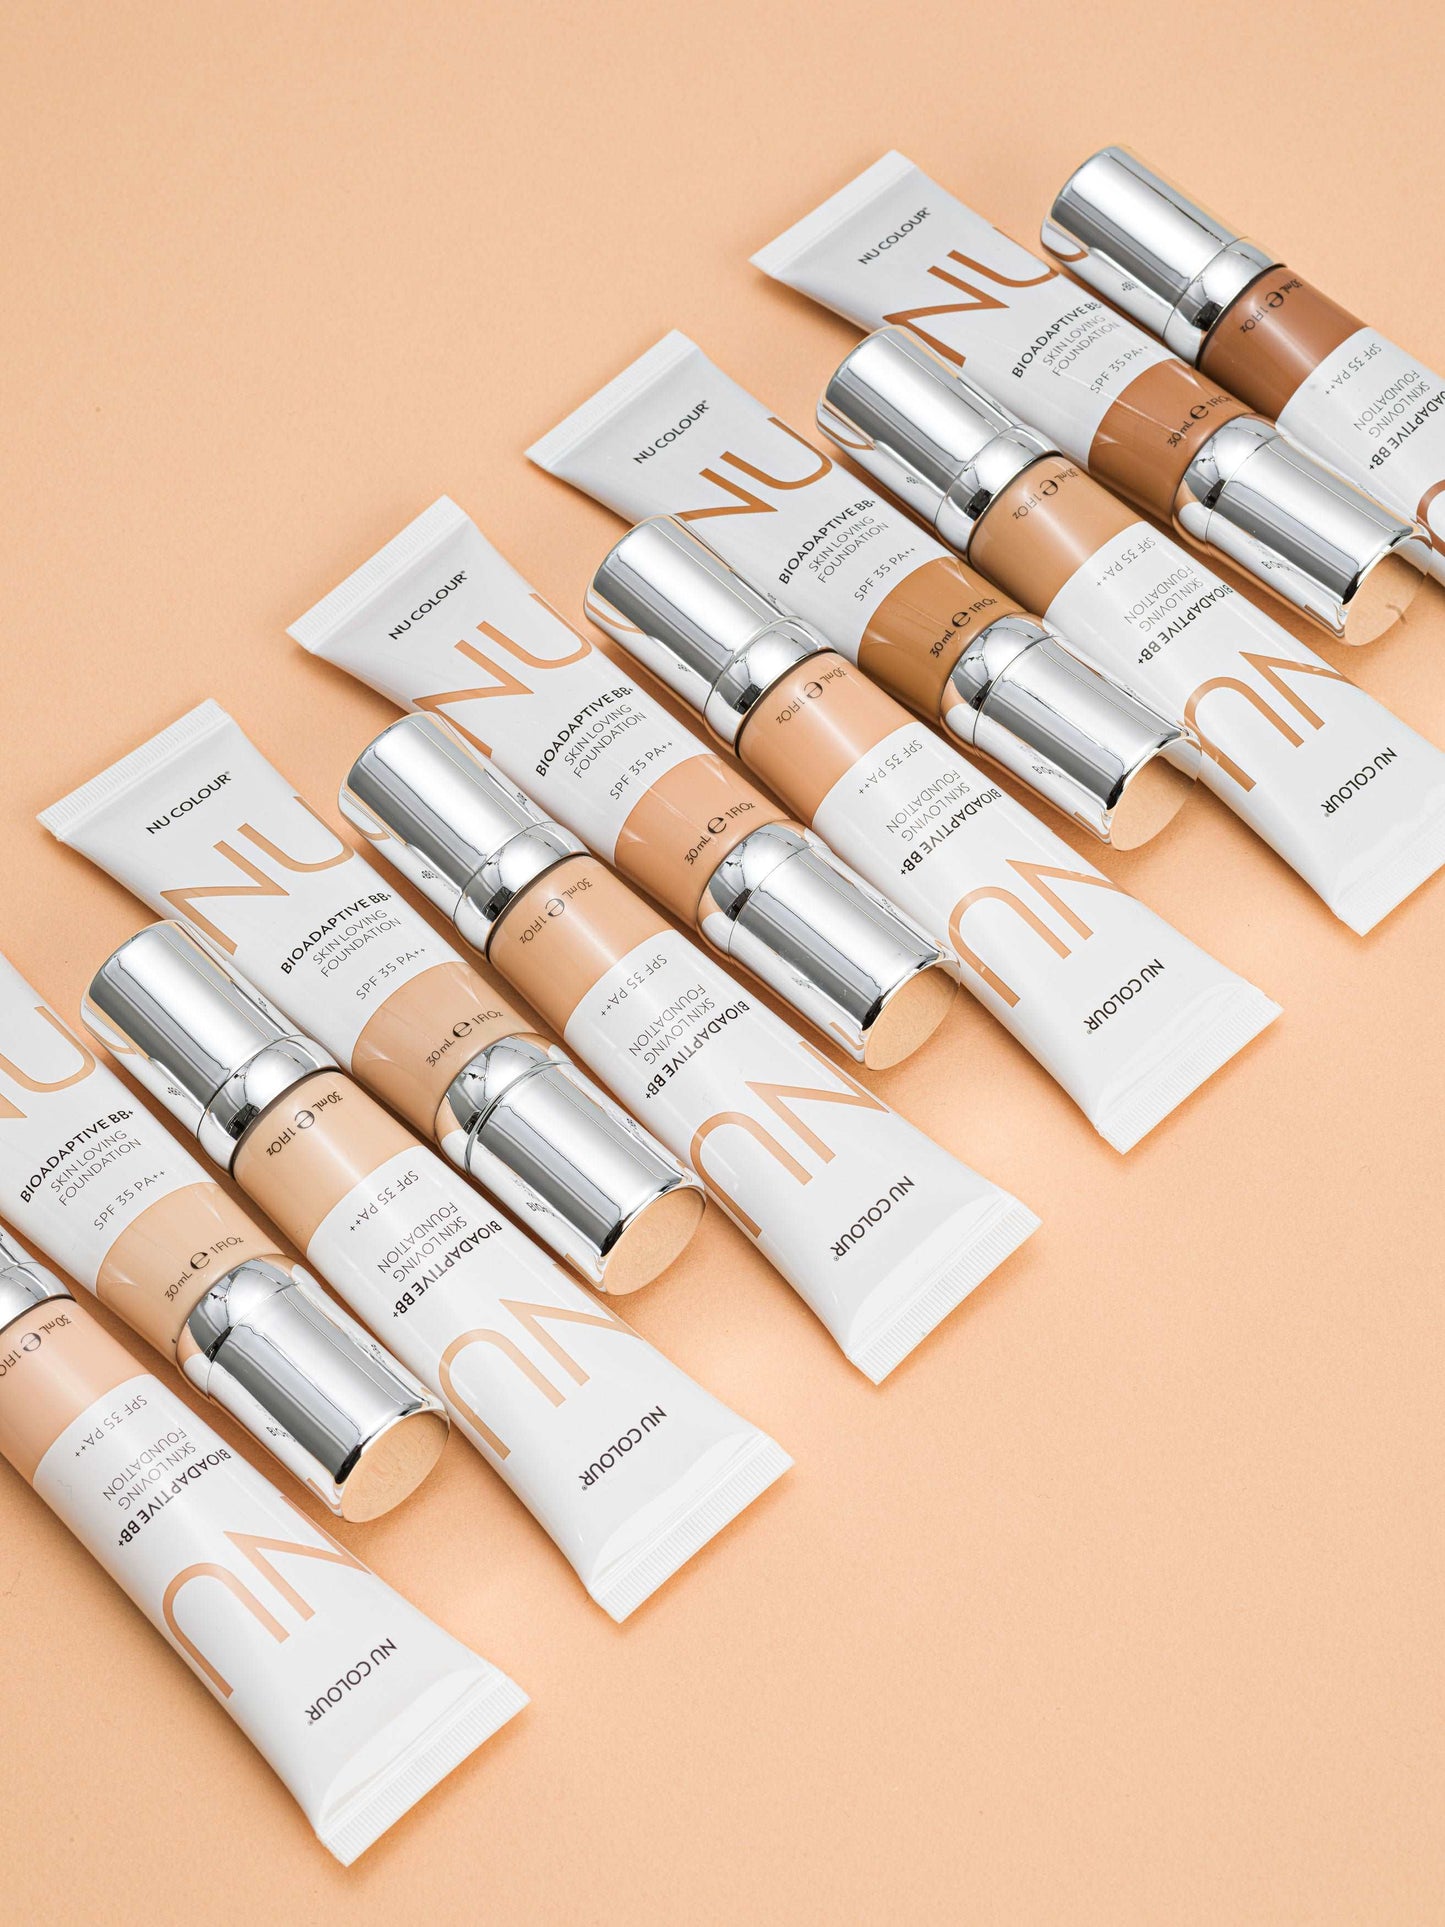 Bioadaptive* BB+ Skin Loving Foundation - tubes in all colors